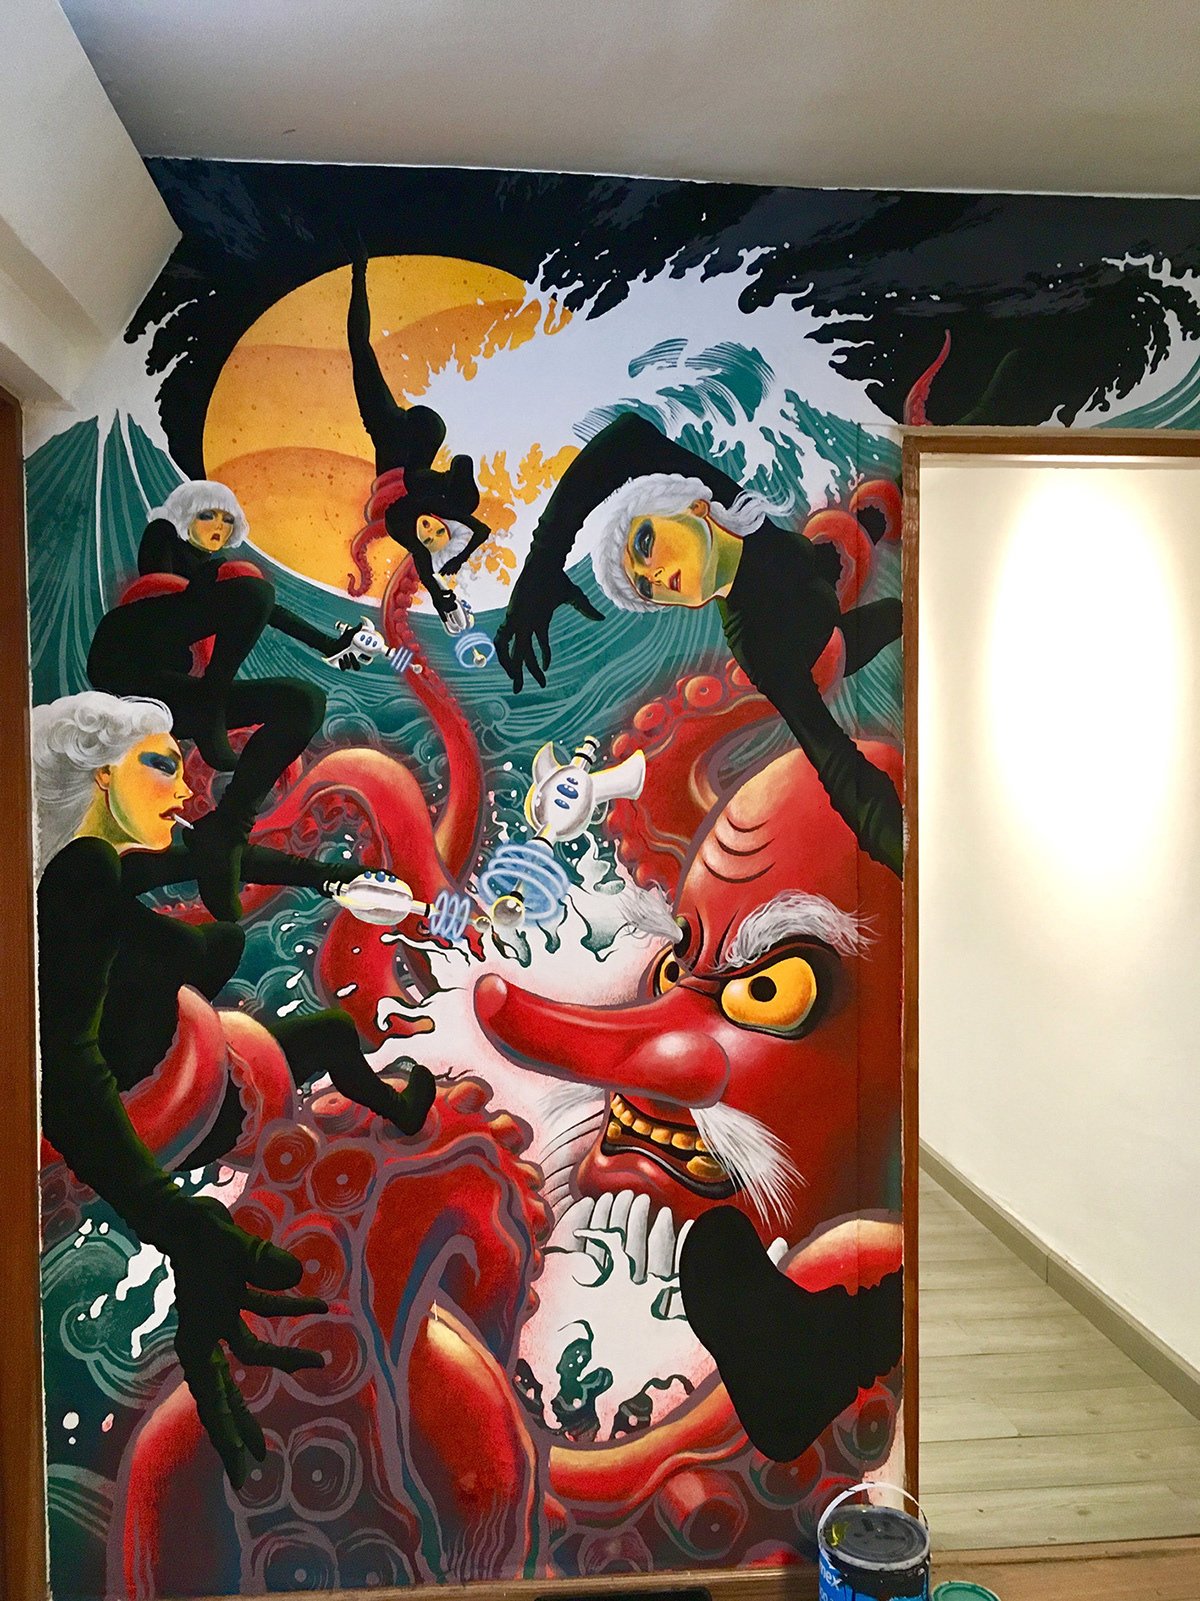 mural design with black female figures in the waves with red octopus